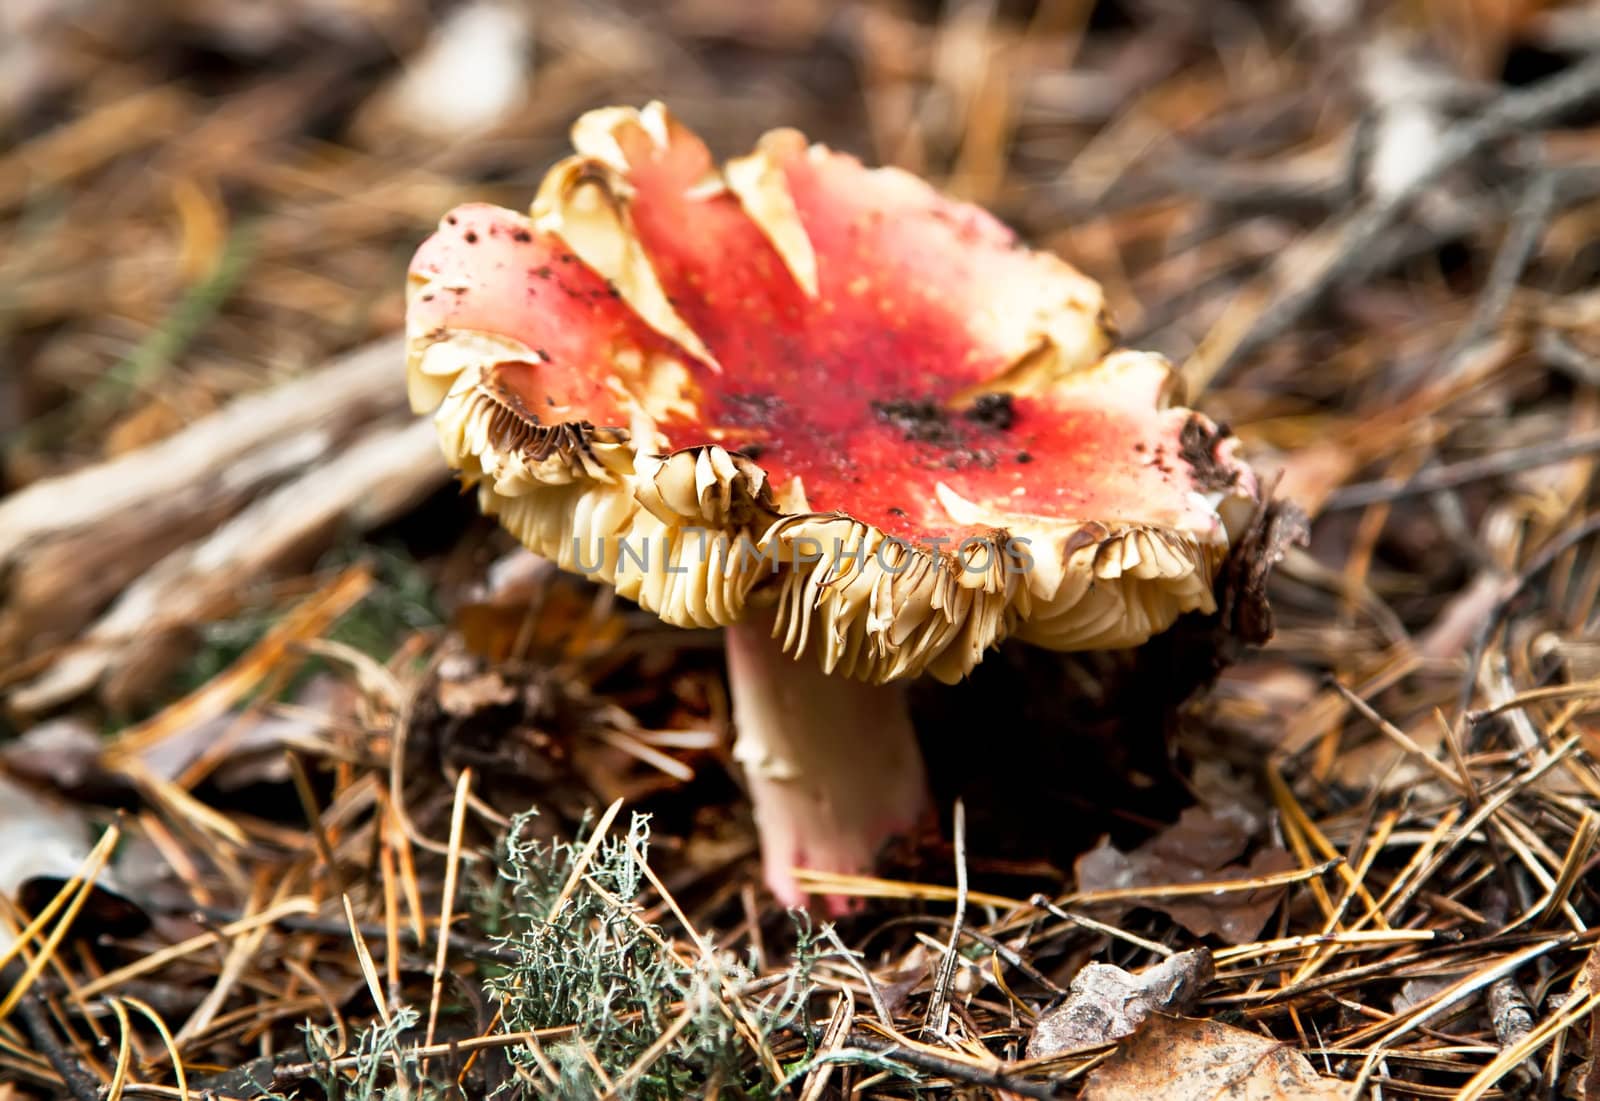 Red toadstool mushroom in autumn forest